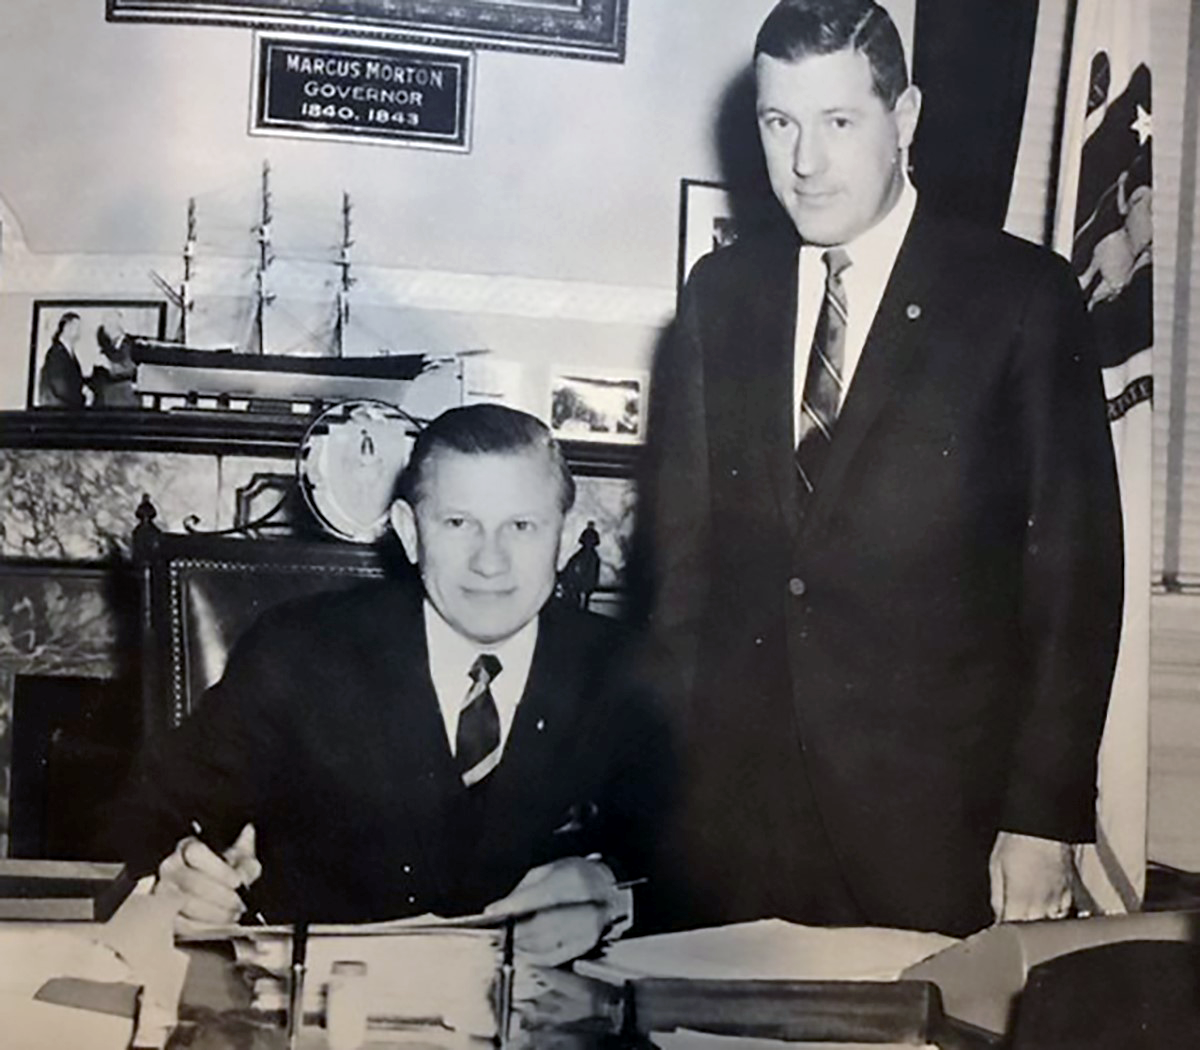 In November 1965, Governor John Volpe signed collective bargaining rights for teachers into Massachusetts law. Standing beside him is MTA Executive Secretary William H. Hebert.